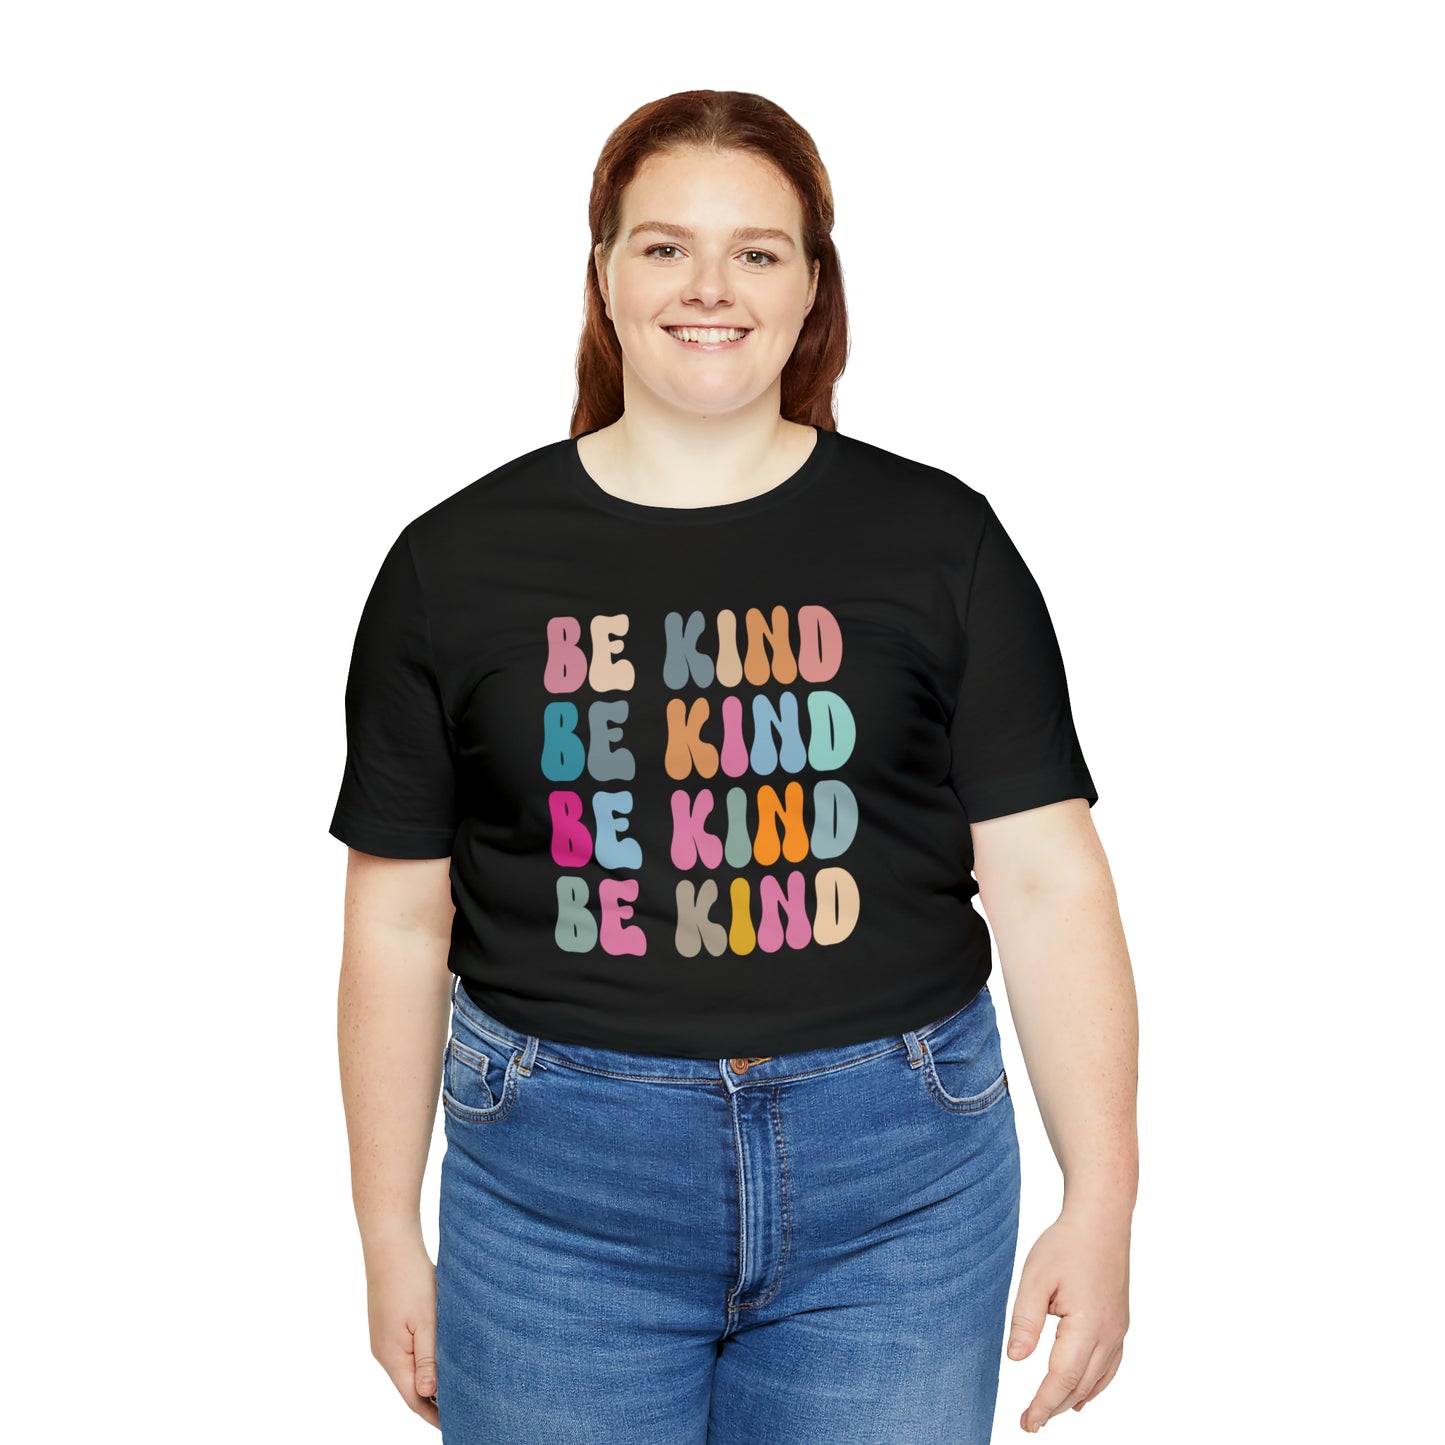 Be Kind TShirt for Her, Retro Be Kind Shirt for Women, Cute Be Kind T-Shirt for Birthday Gift, T445